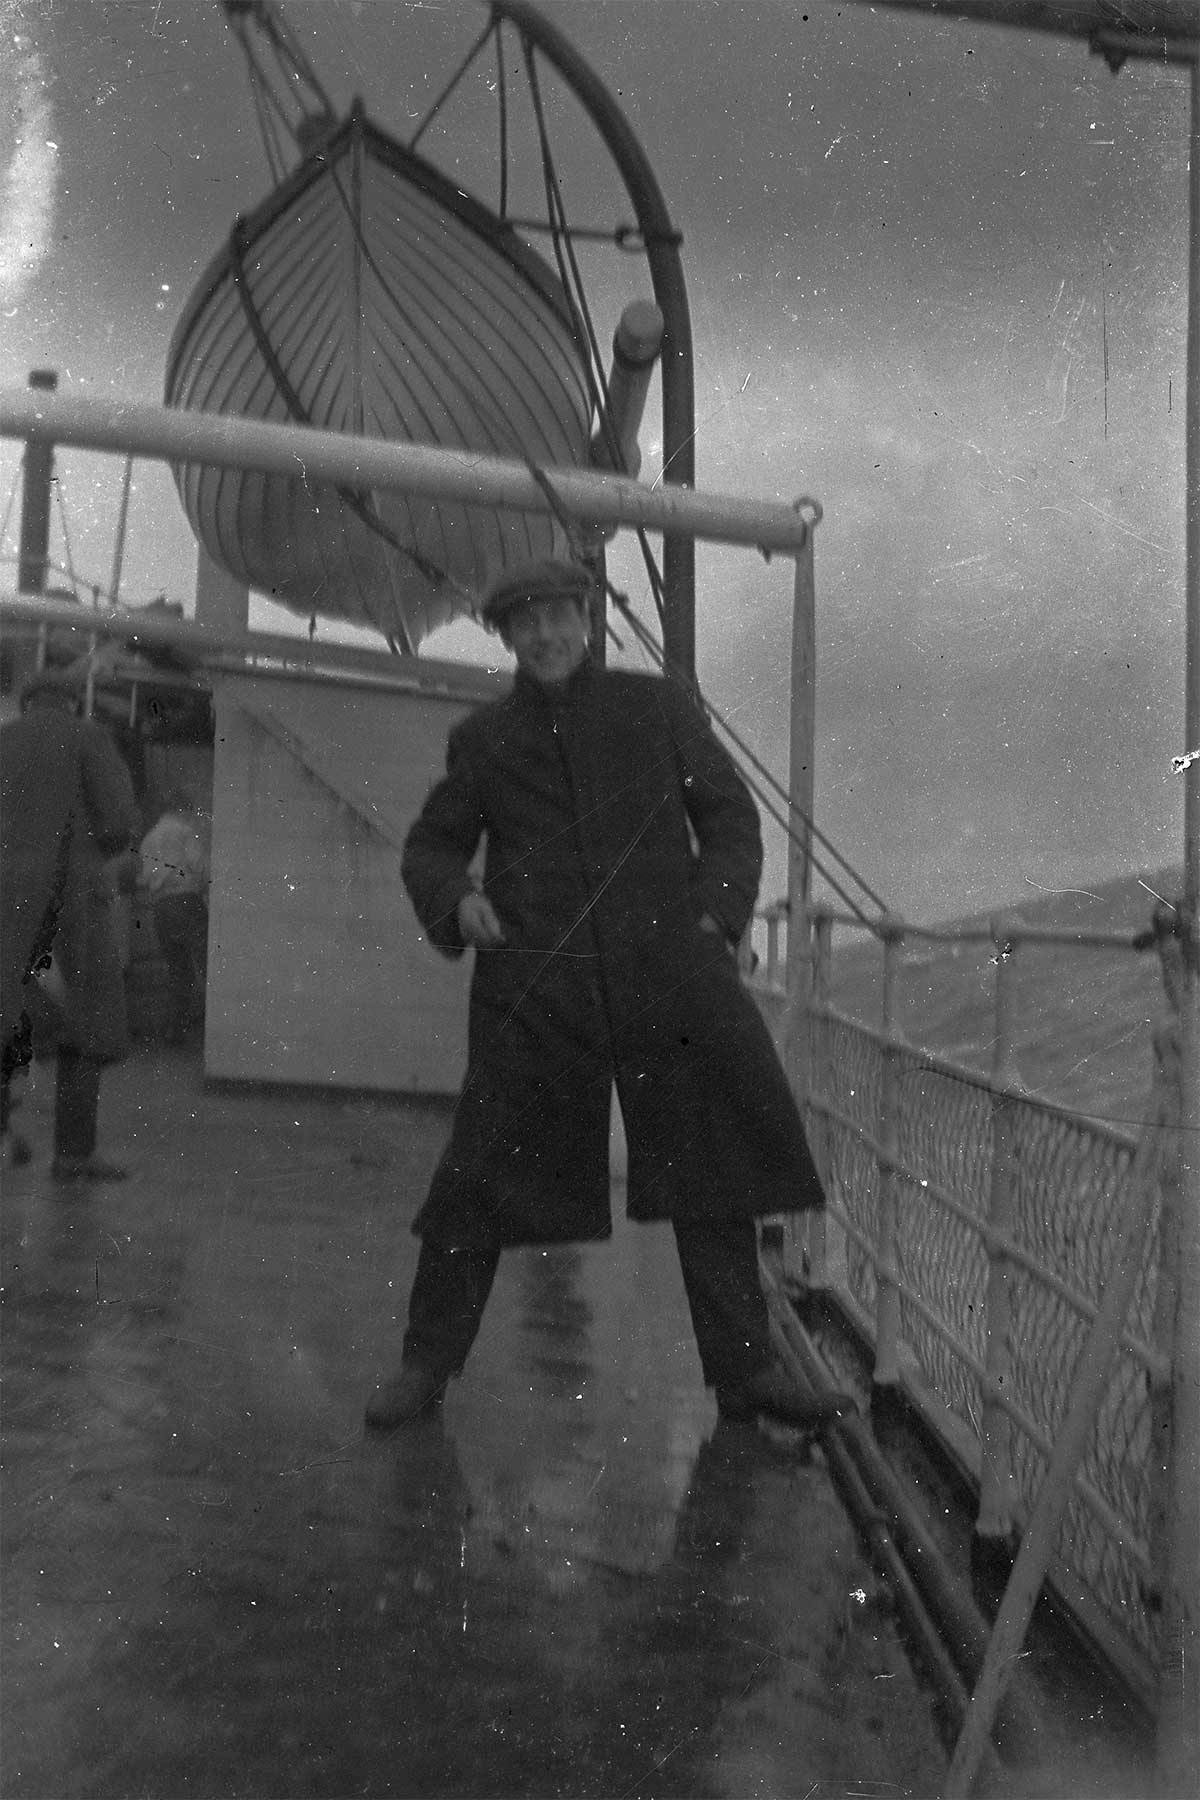 Man on deck of a passenger ship, during rough sea c1900s